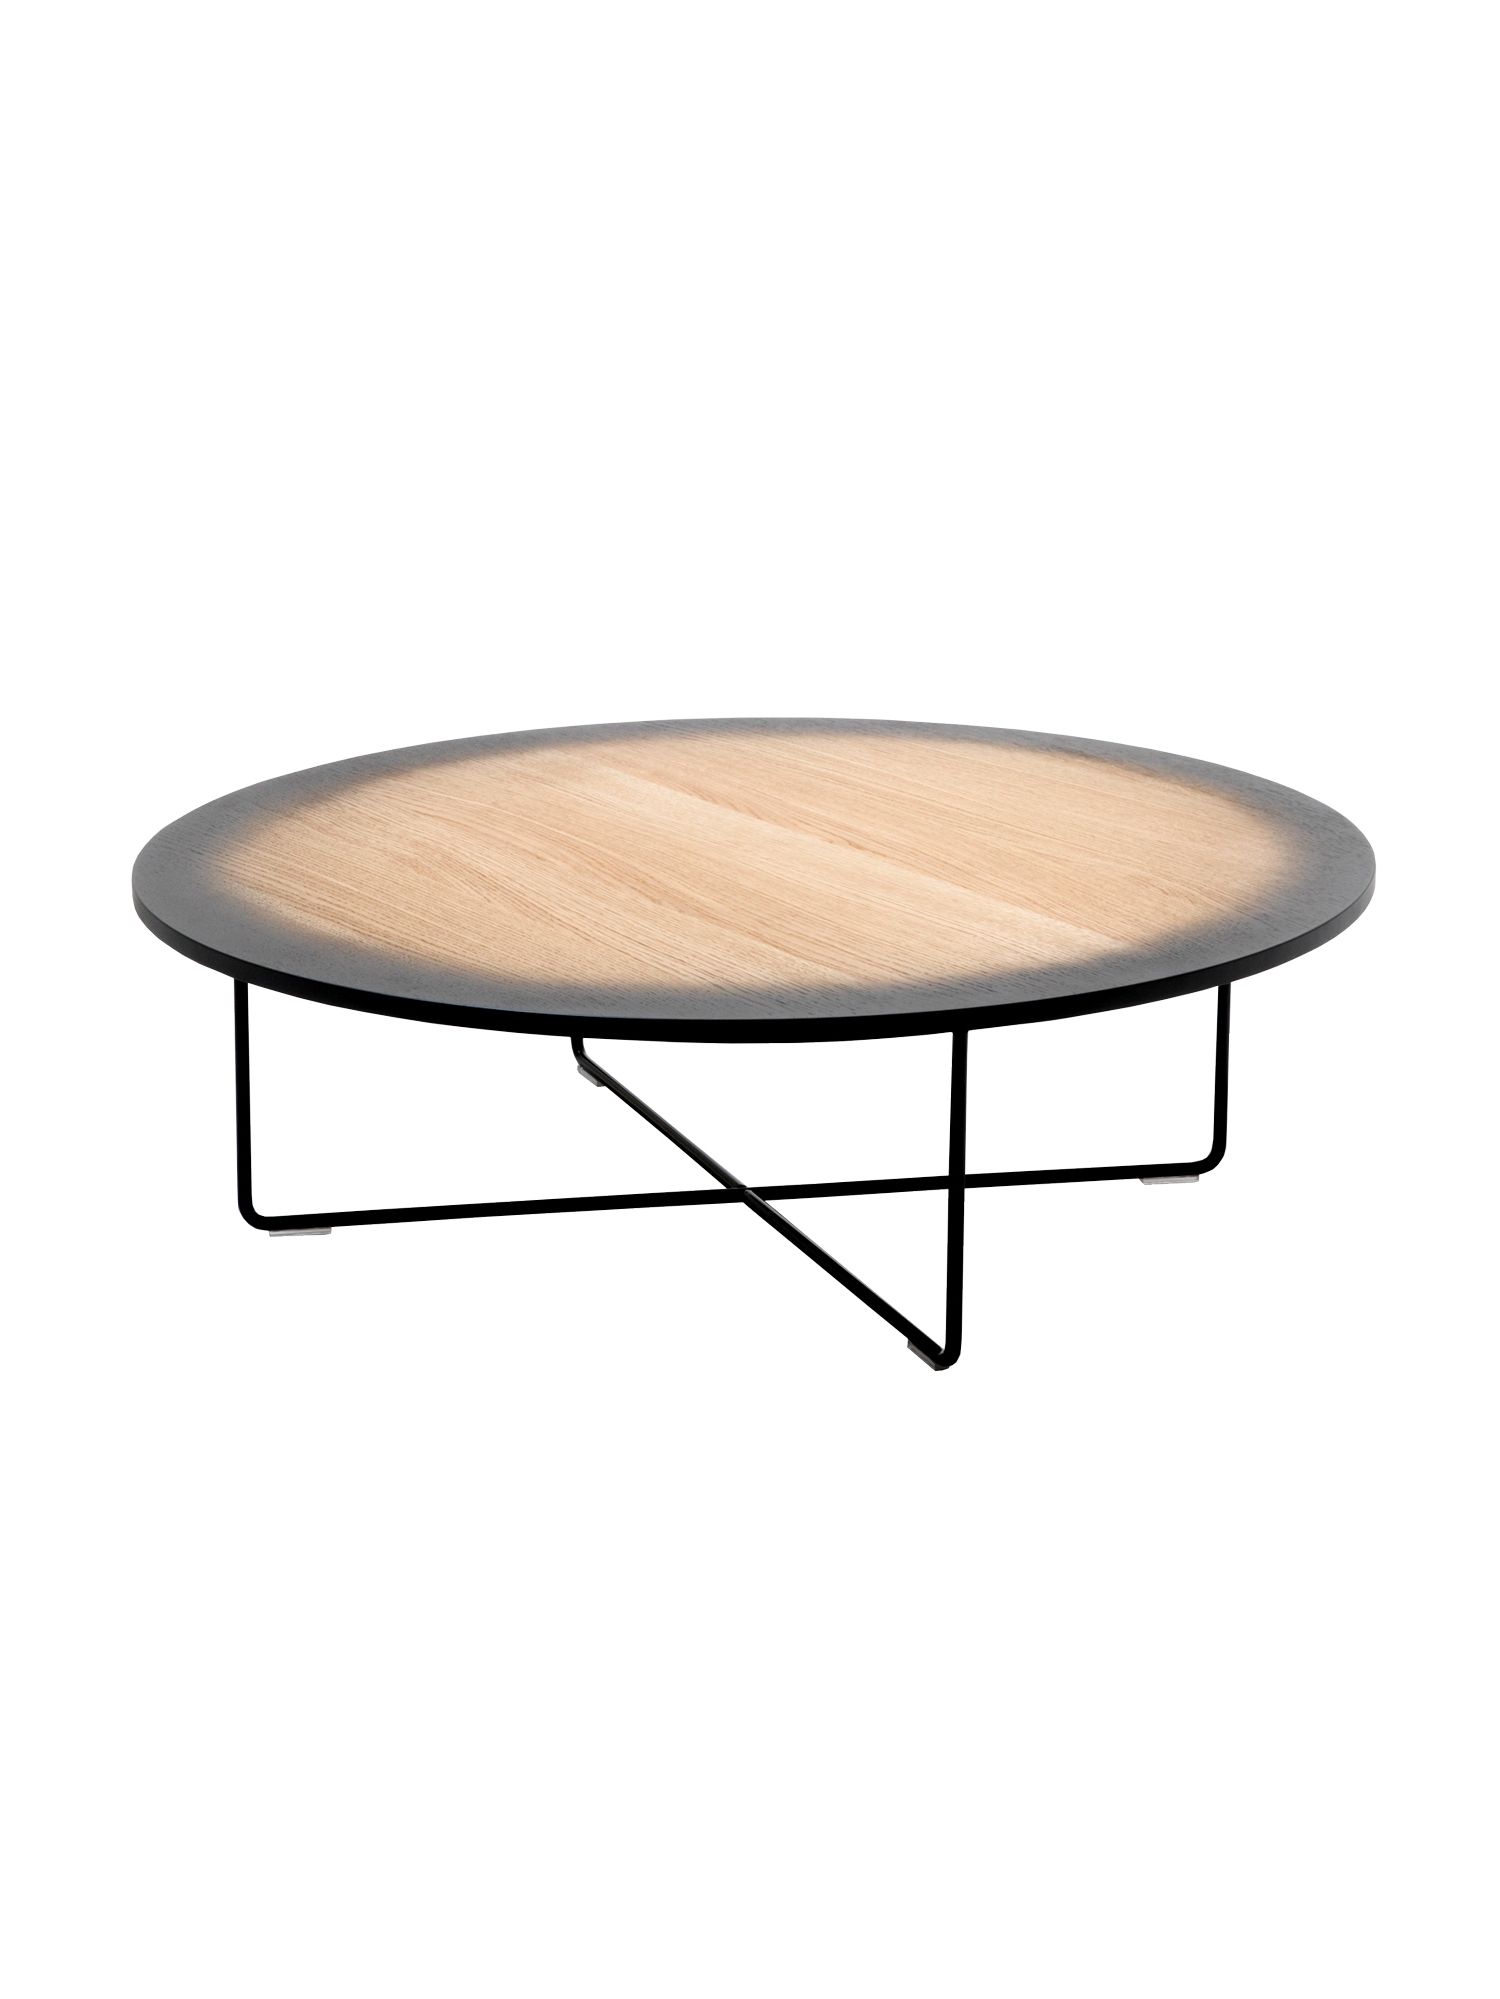 Recent My Moon My Mirror – Petite Table Intended For Mirrored Outdoor Tables (View 9 of 15)